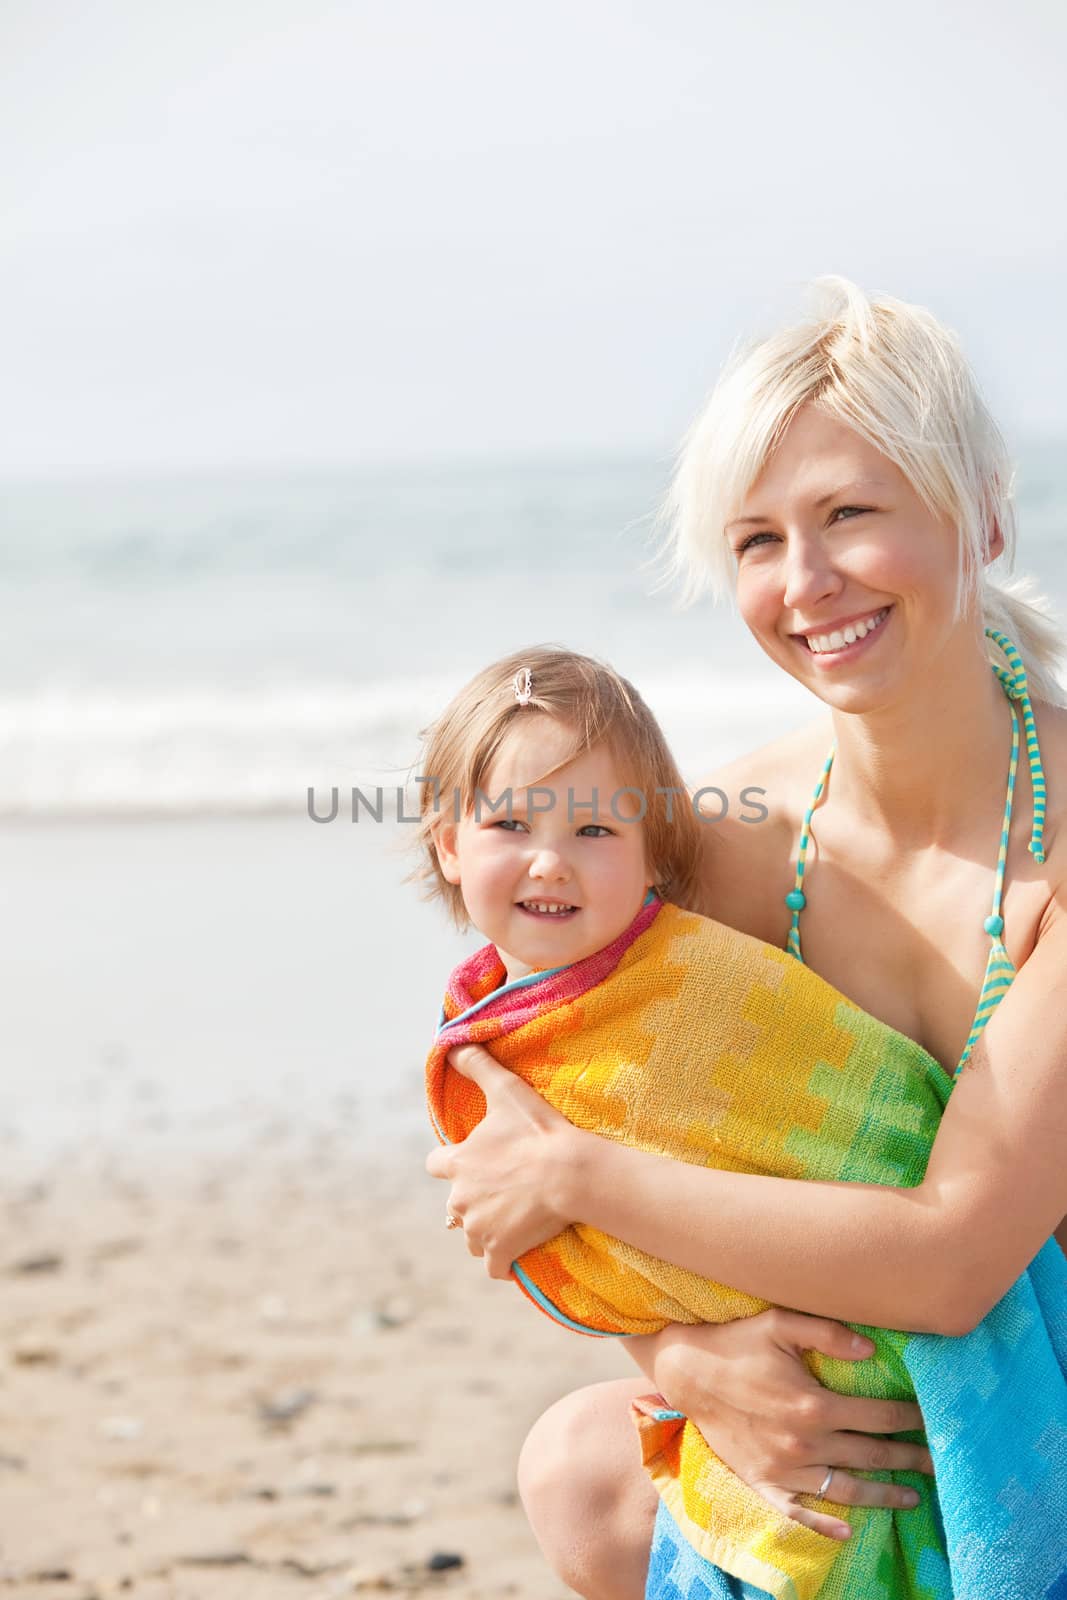 A cheerful girl and her smiling mother at the beach by Wavebreakmedia